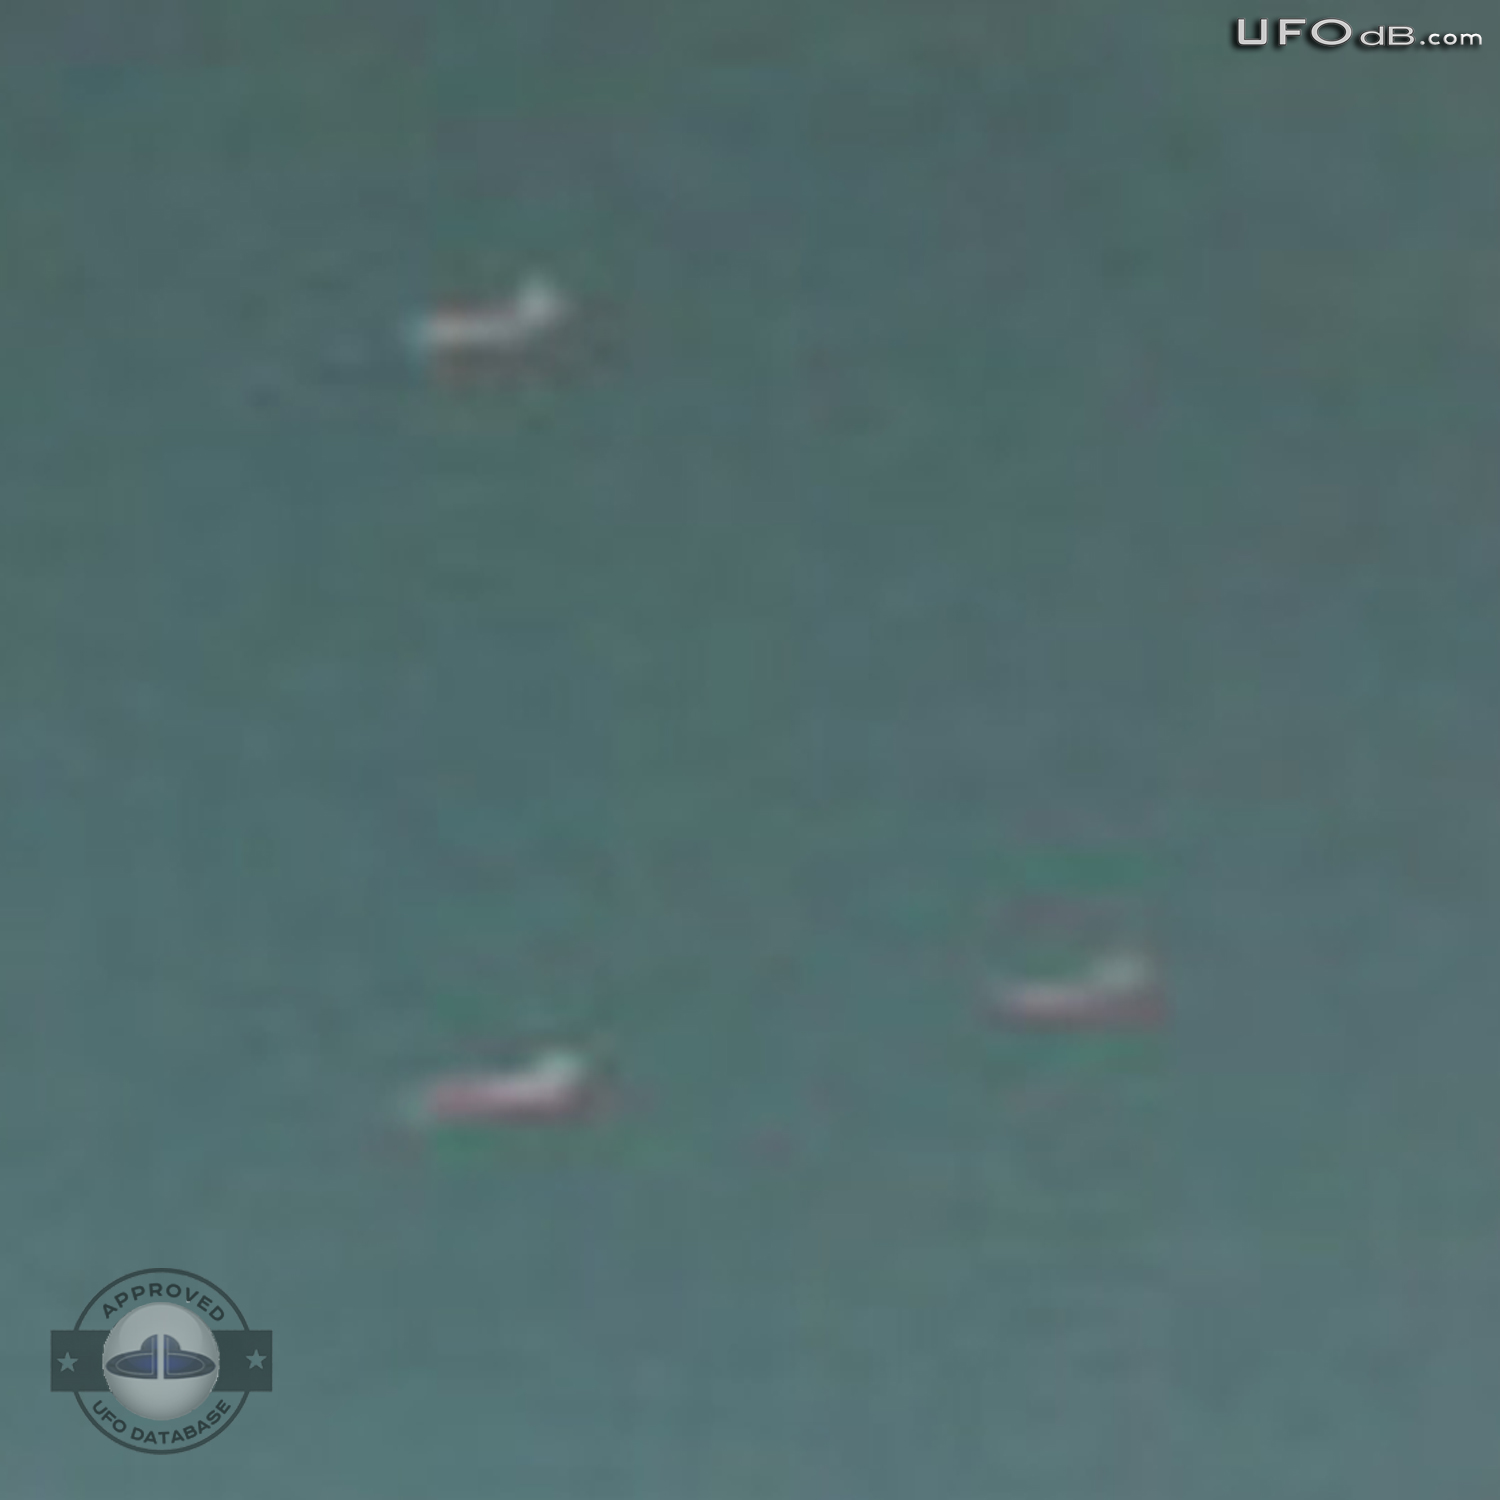 Lady Terrified by Huge UFO over her house | Illinois, USA | May 4 2011 UFO Picture #290-4